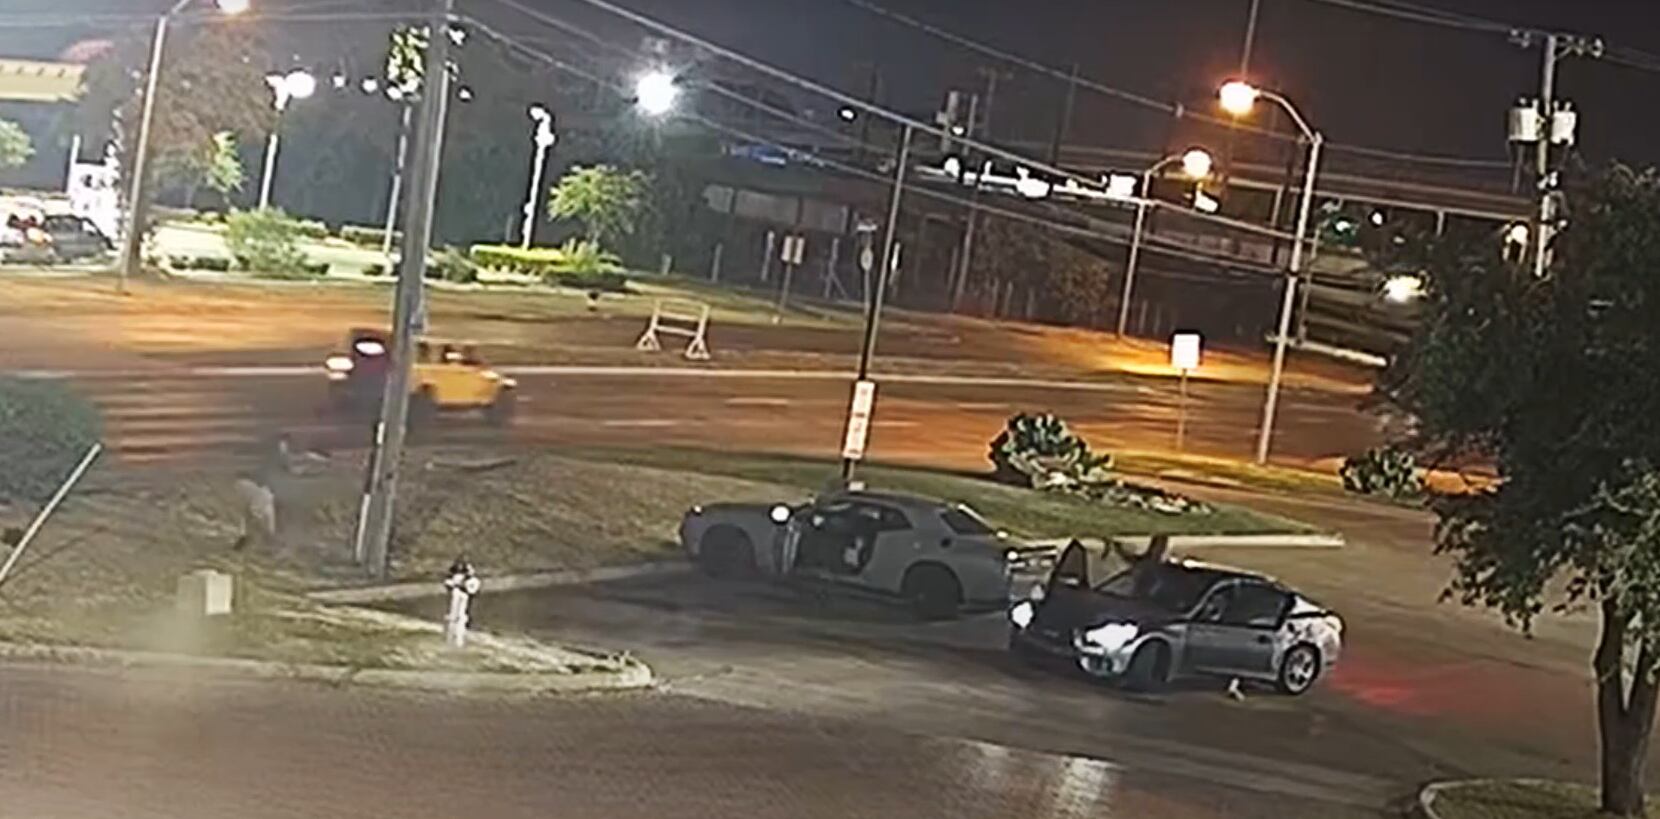 Surveillance footage shows Dallas police Officer Nathaniel Chapman trading fire with at...